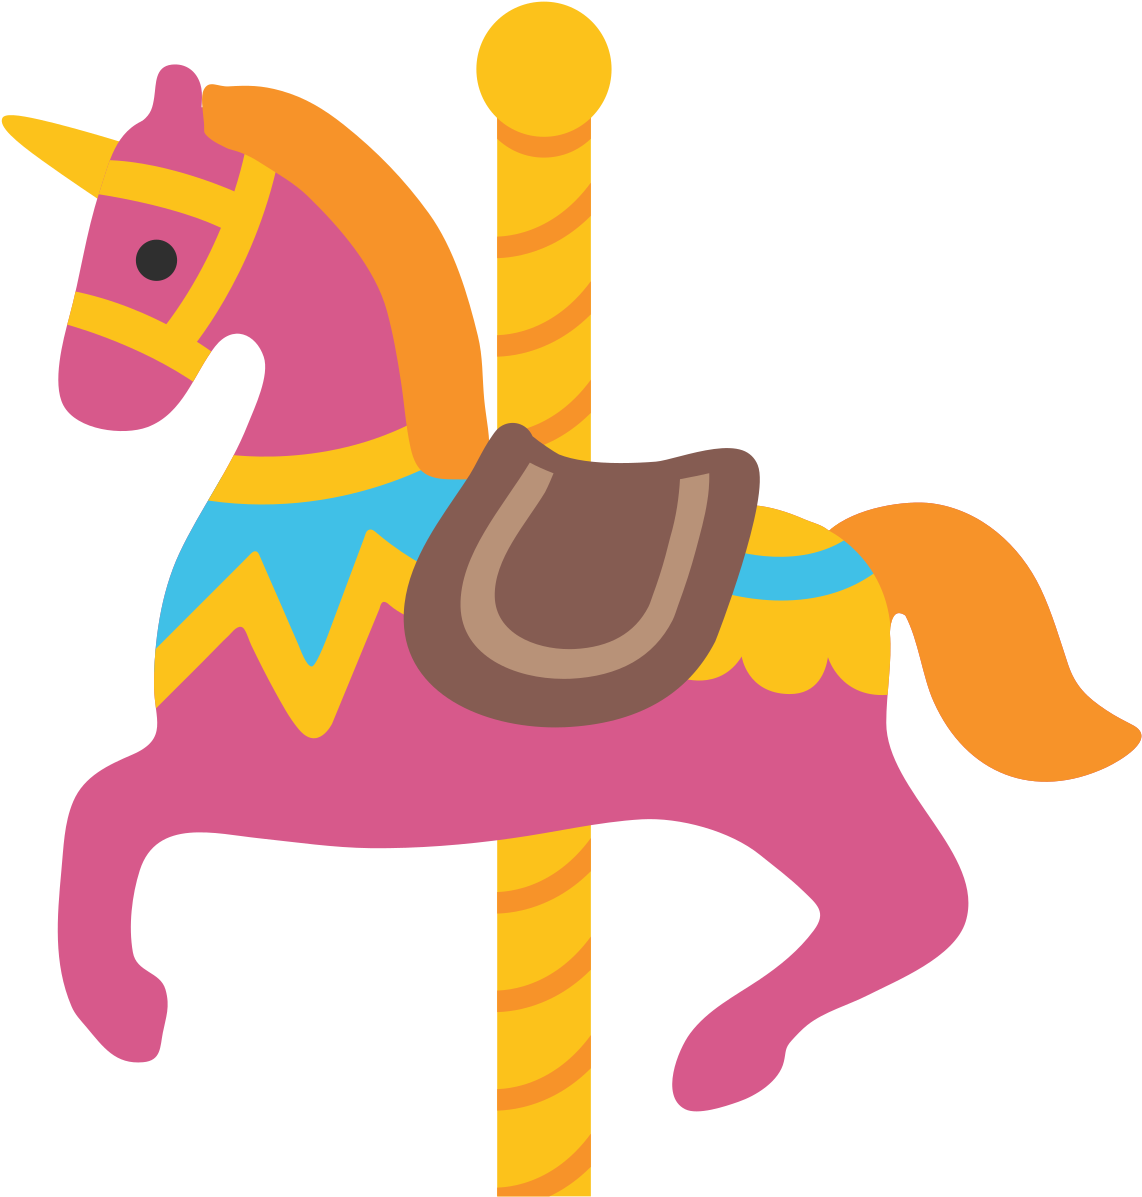 Colorful Carousel Horse Illustration PNG